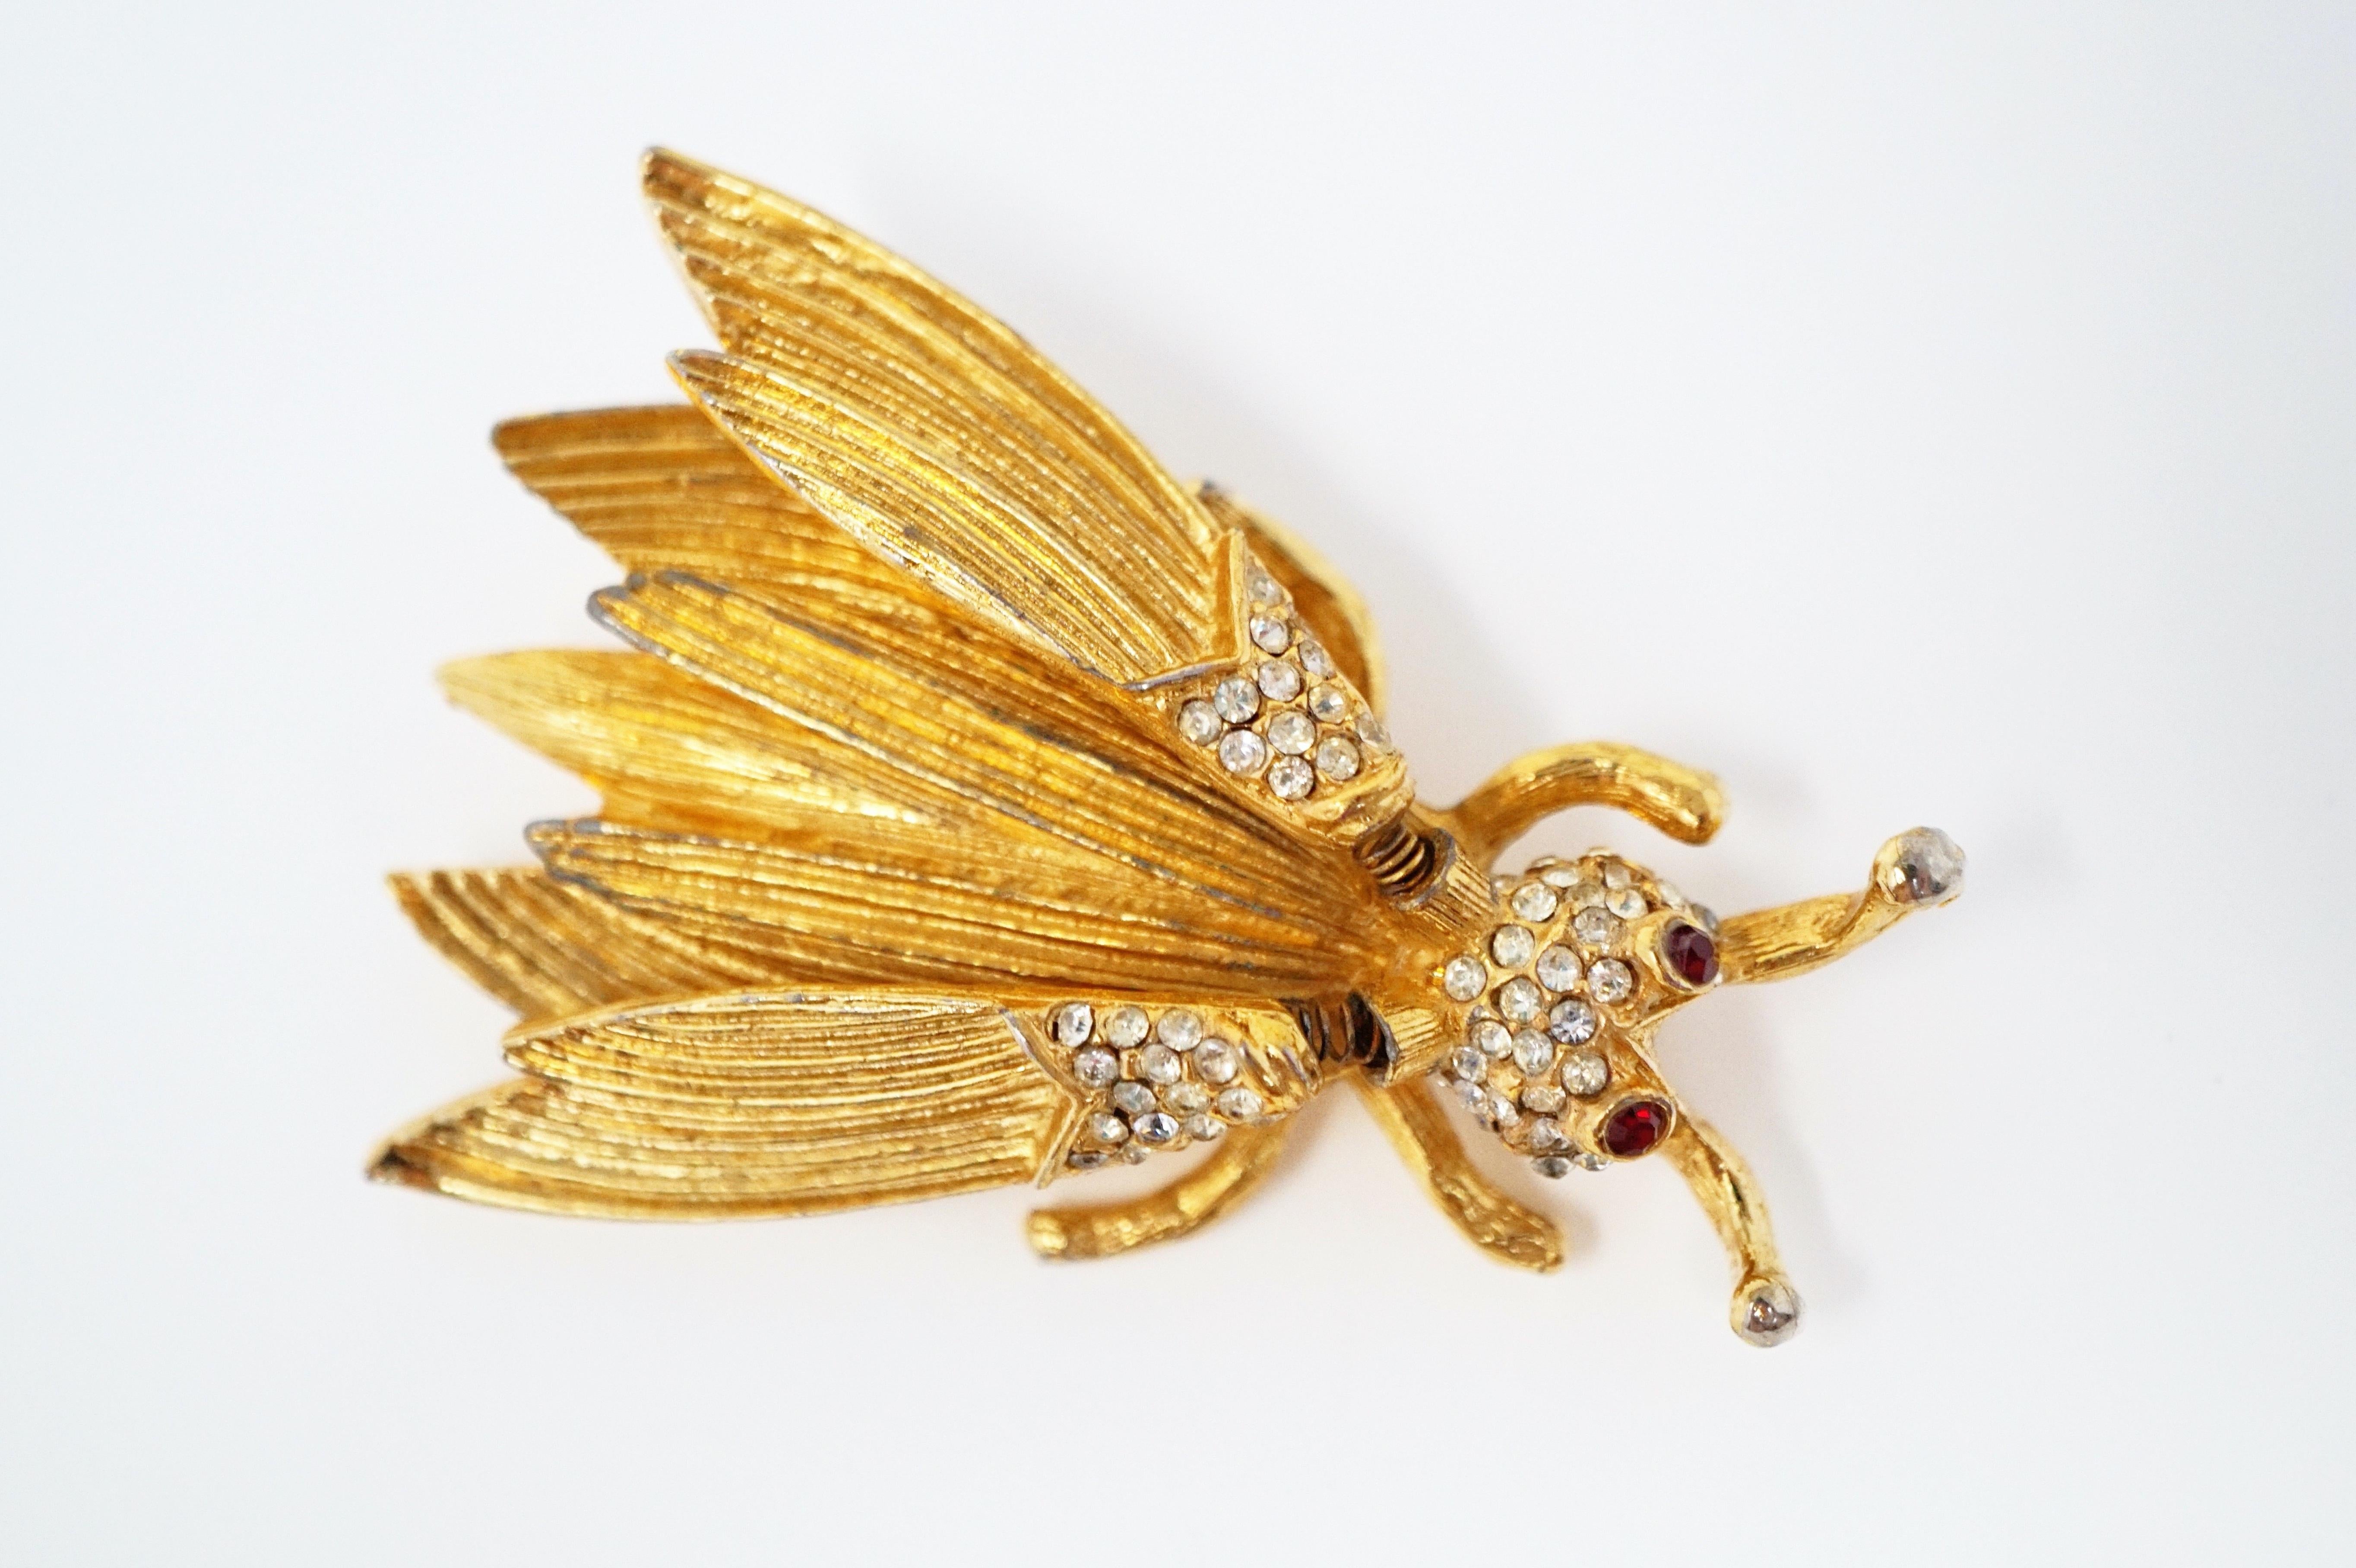 This whimsical insect trembler brooch, attributed to Hattie Carnegie circa 1940s, has wings on tiny springs so that they flutter with every movement.  Covered in gold-plating and crystal rhinestone pavé, this little bug is such a fun and unique